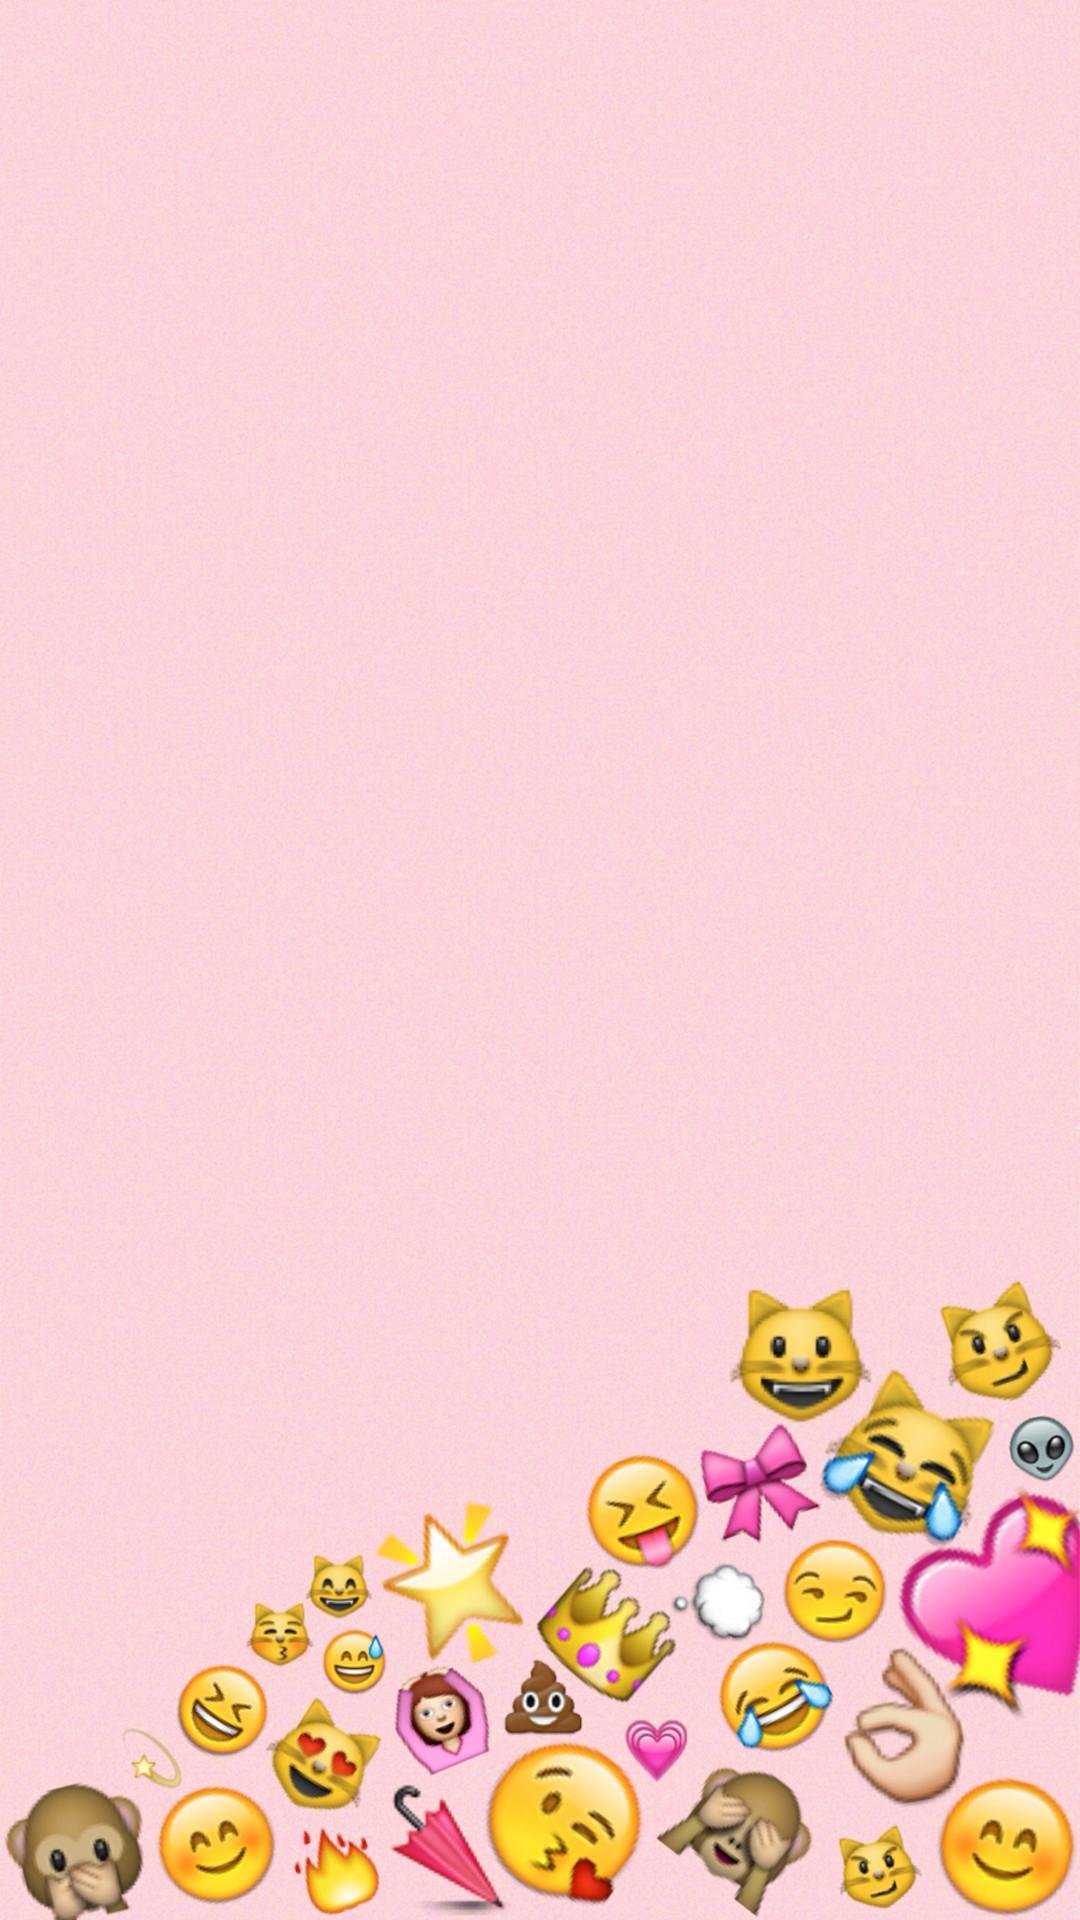 Aesthetic Emoji With Pink Background